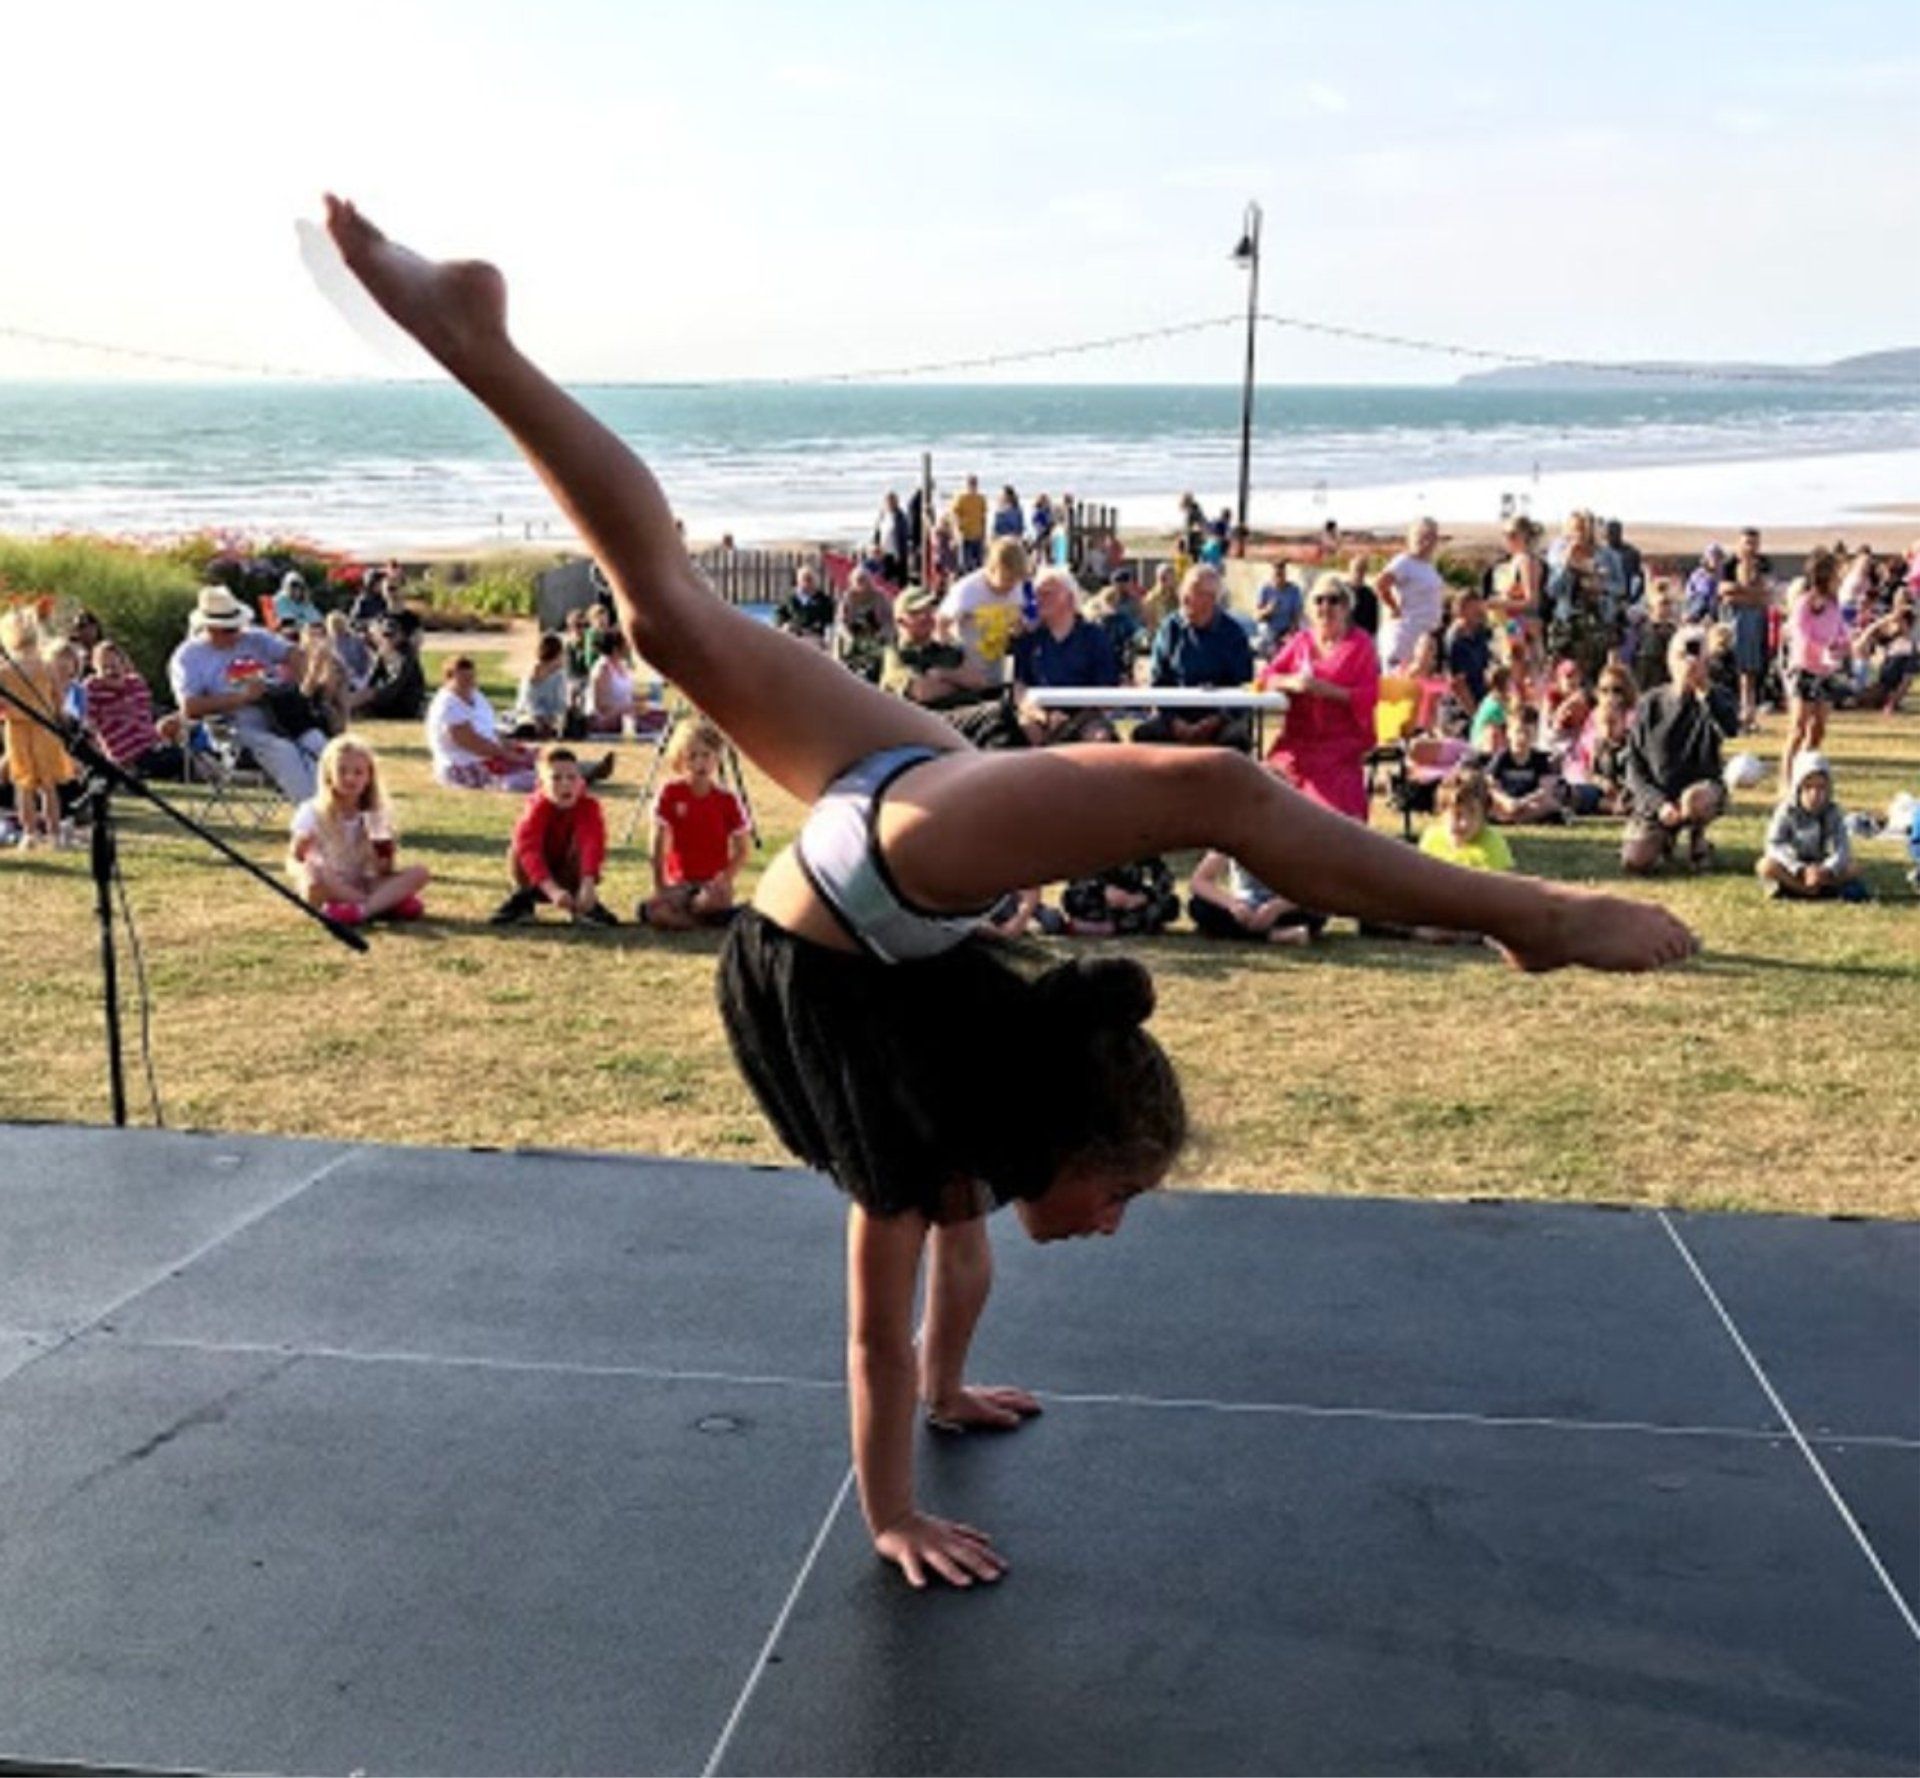 Libby Lamont performing contortion at the Sunset Festival in Westward Ho!